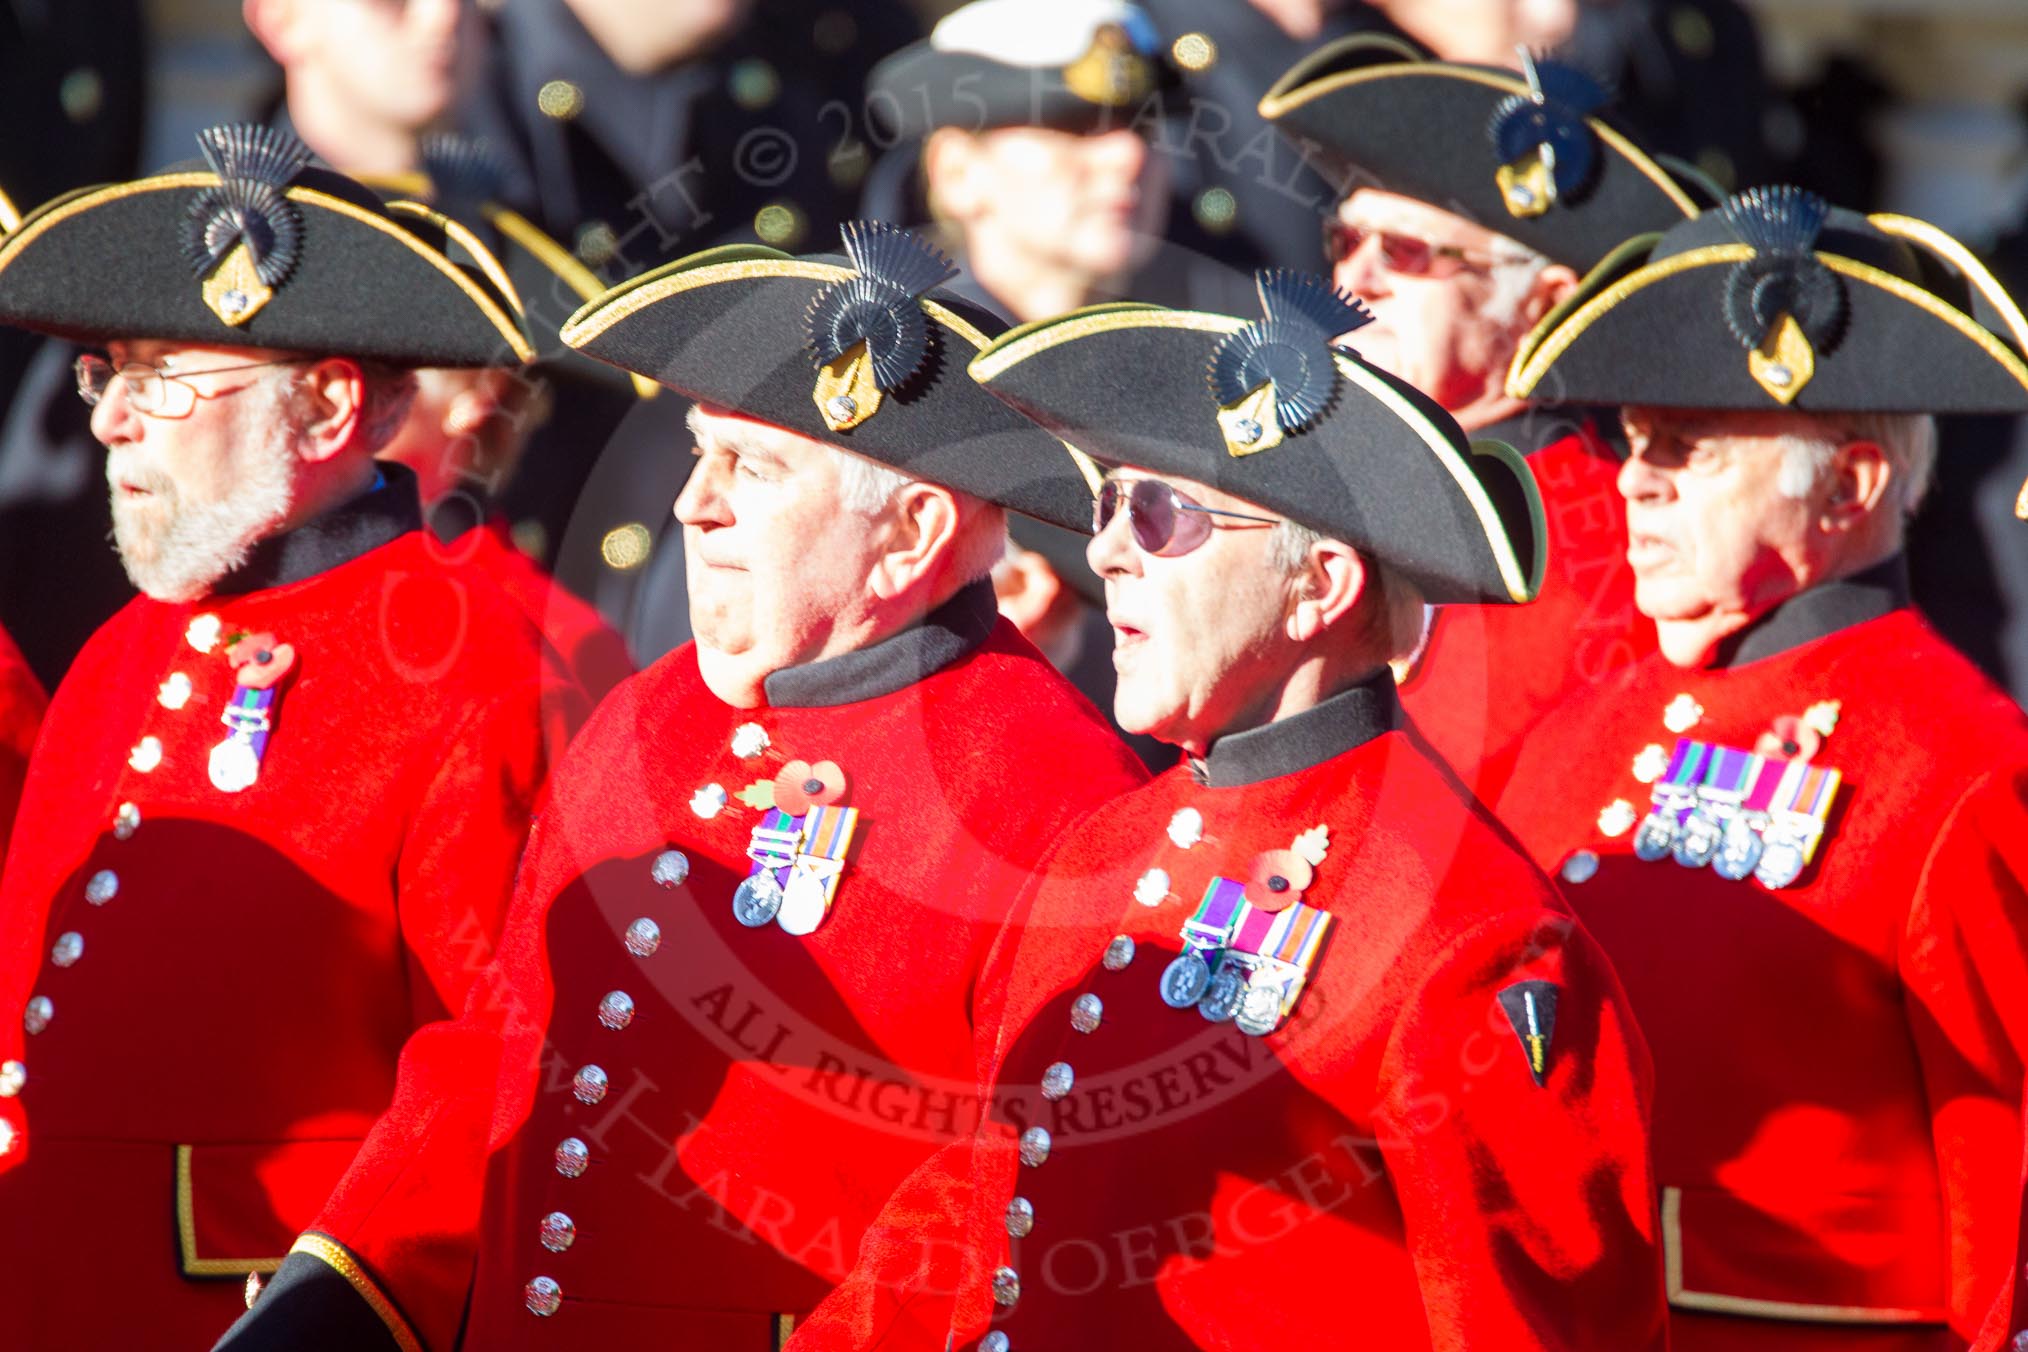 Remembrance Sunday Cenotaph March Past 2013: D30 - Royal Hospital Chelsea, the Chelsea Pensioners..
Press stand opposite the Foreign Office building, Whitehall, London SW1,
London,
Greater London,
United Kingdom,
on 10 November 2013 at 11:43, image #273